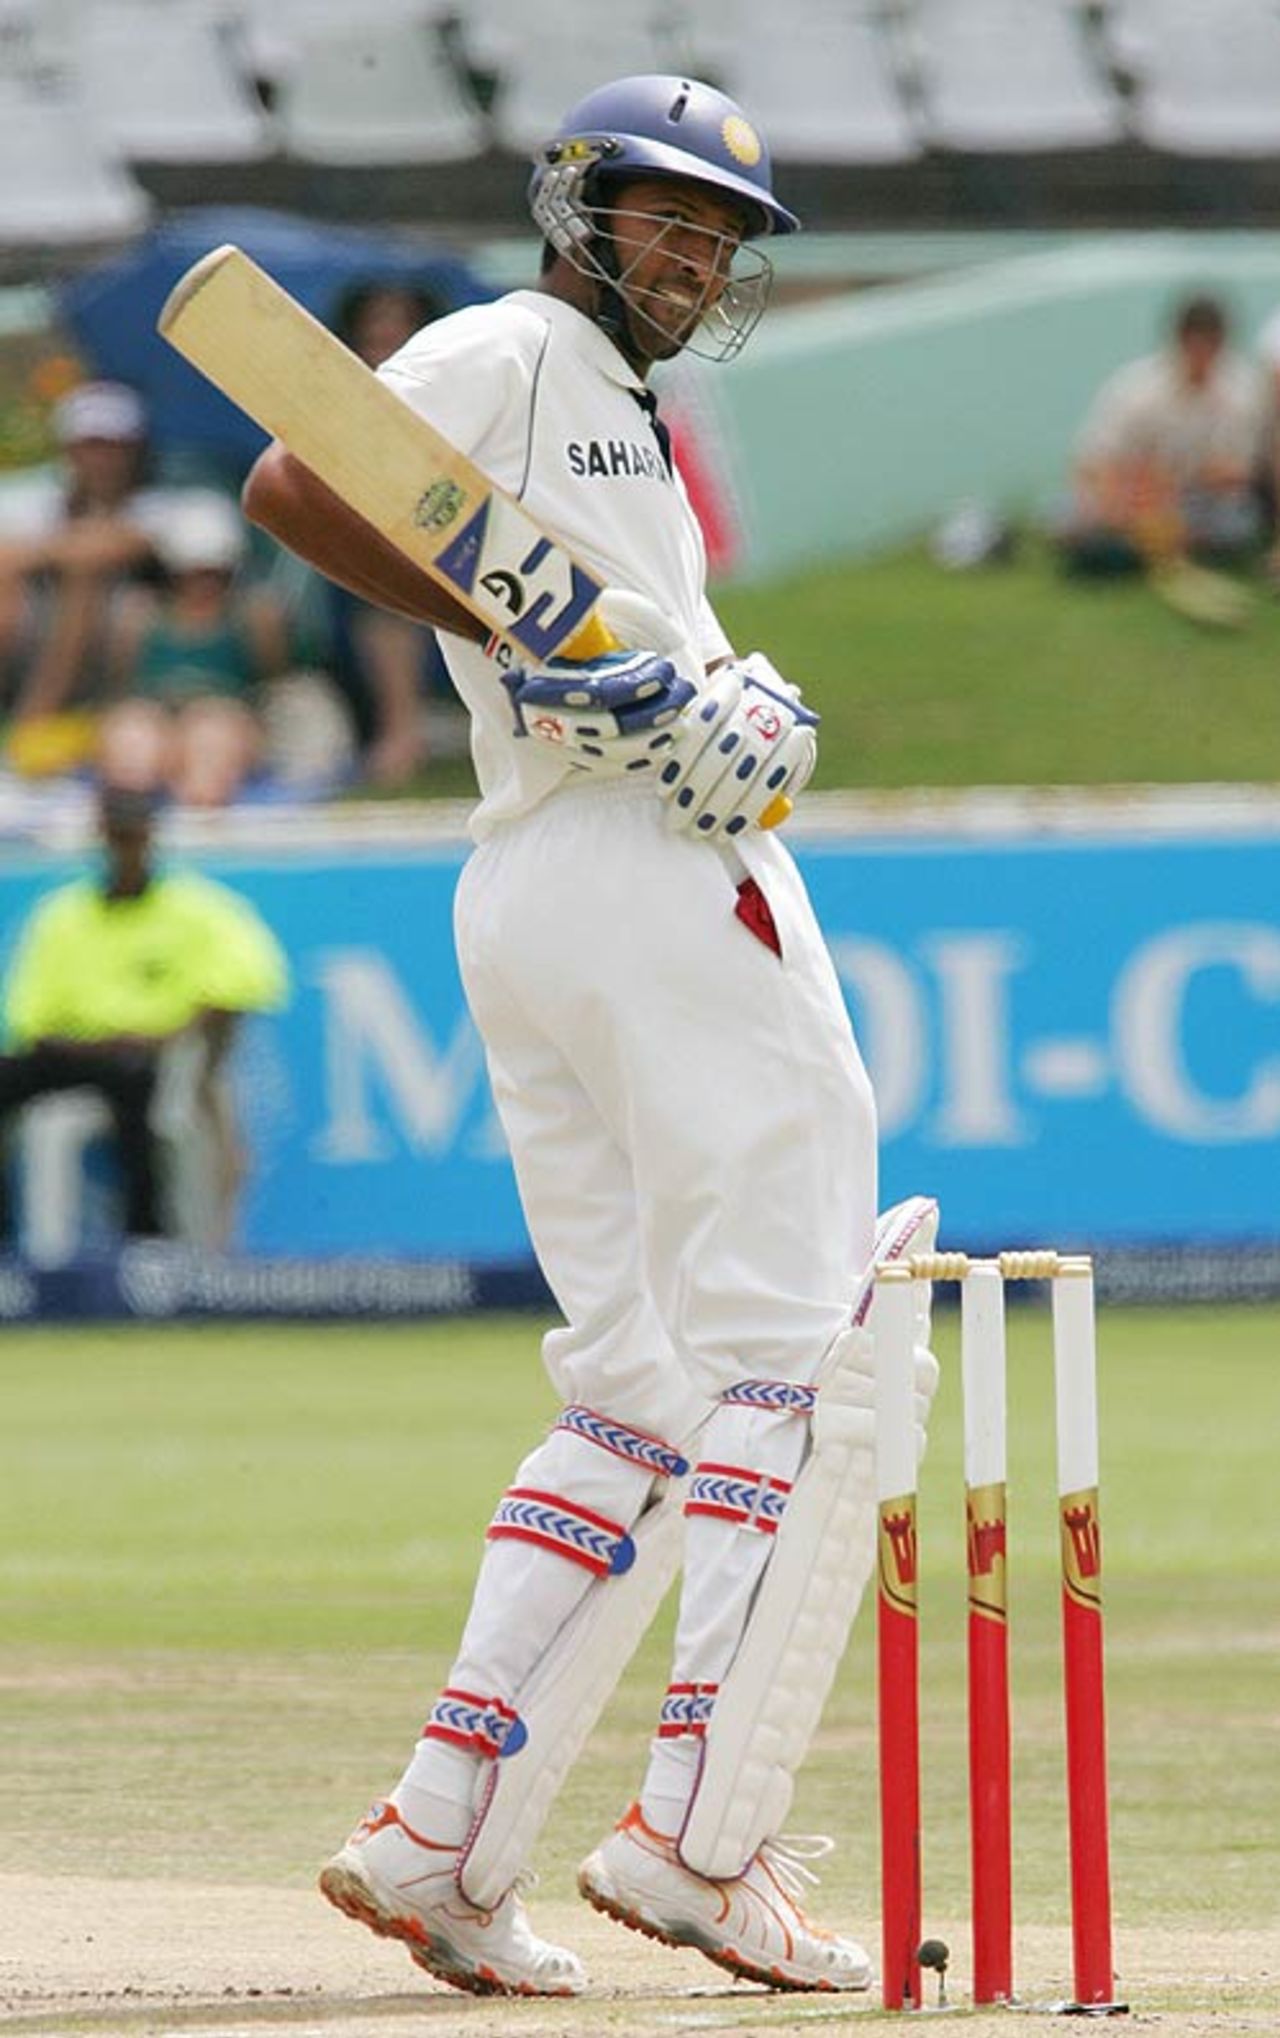 Wasim Jaffer gloves a catch to slips, South Africa v India, 3rd Test, Cape Town, 4th day, January 5, 2007